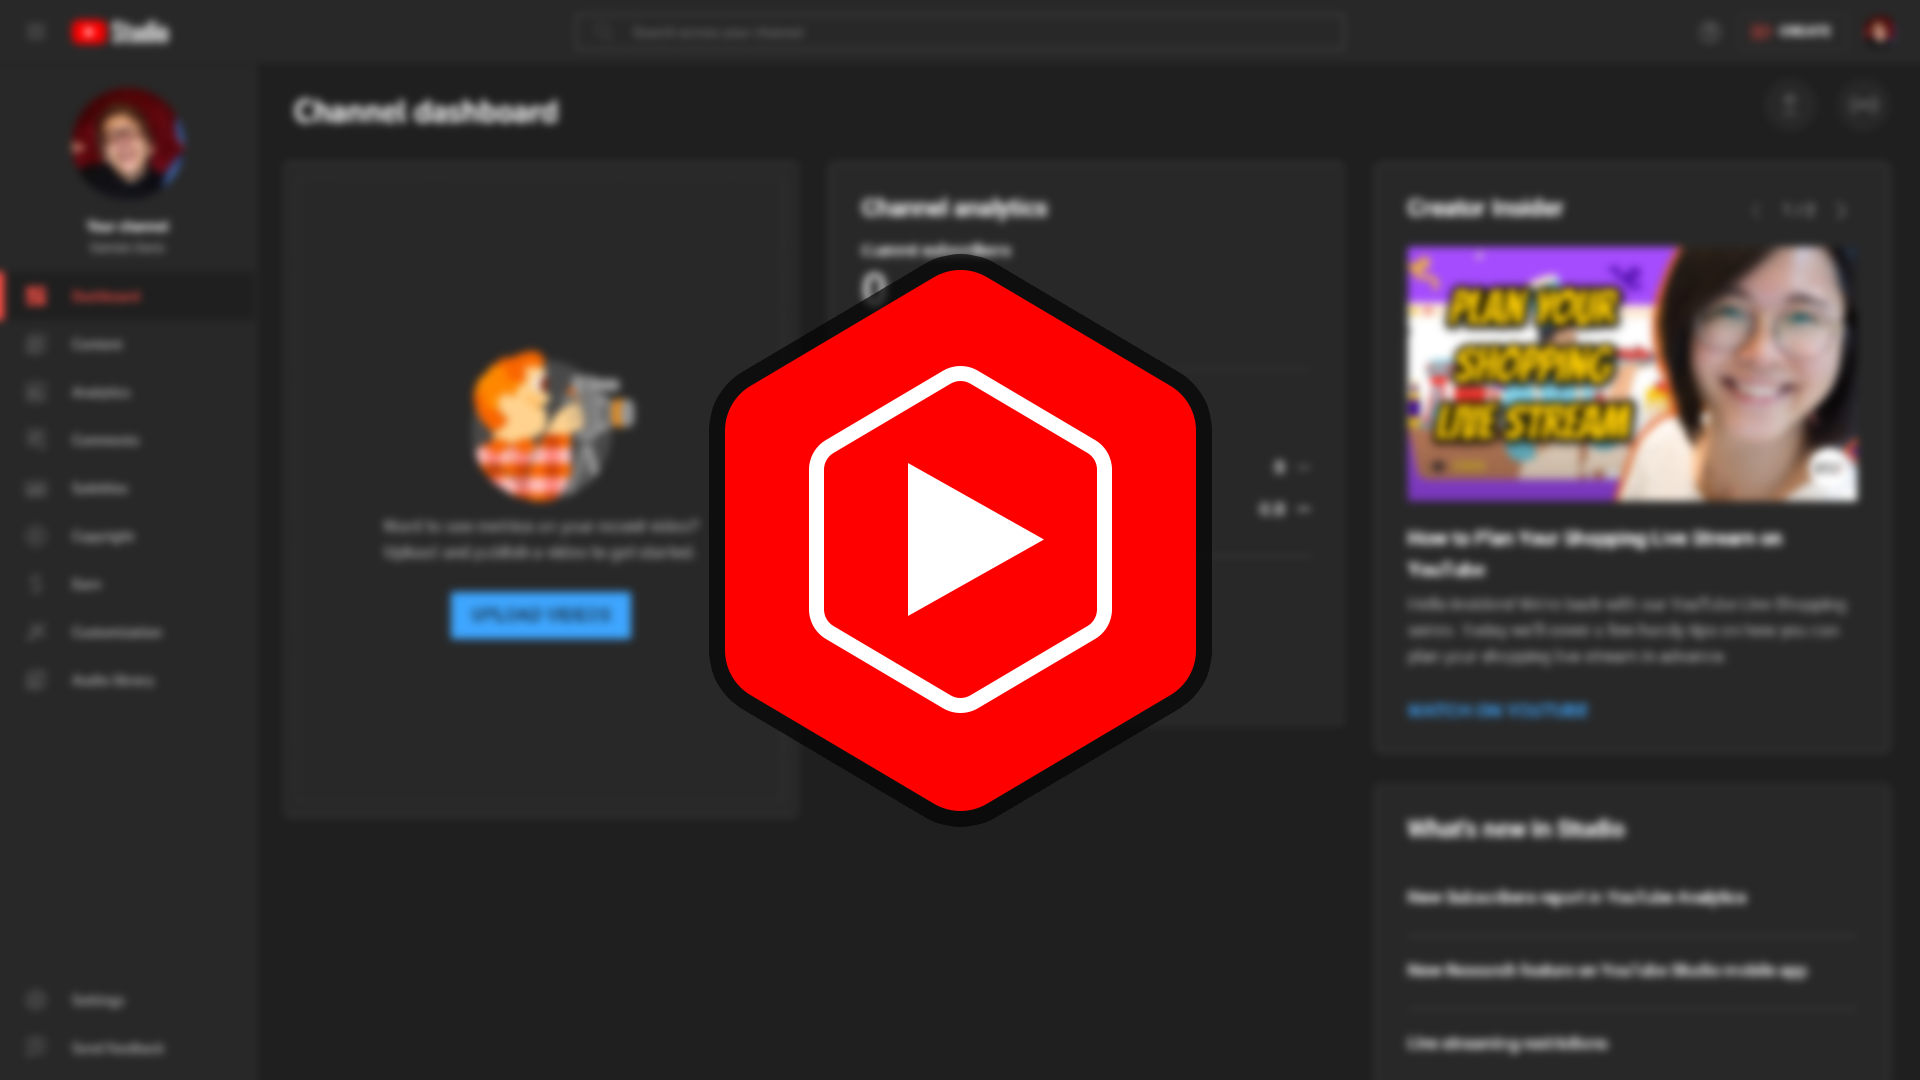 A showcase of the YouTube Studio Favicon being changed to ease confusion, showing off the YouTube Studio Favicon chrome extension made by Damien DavisNeff